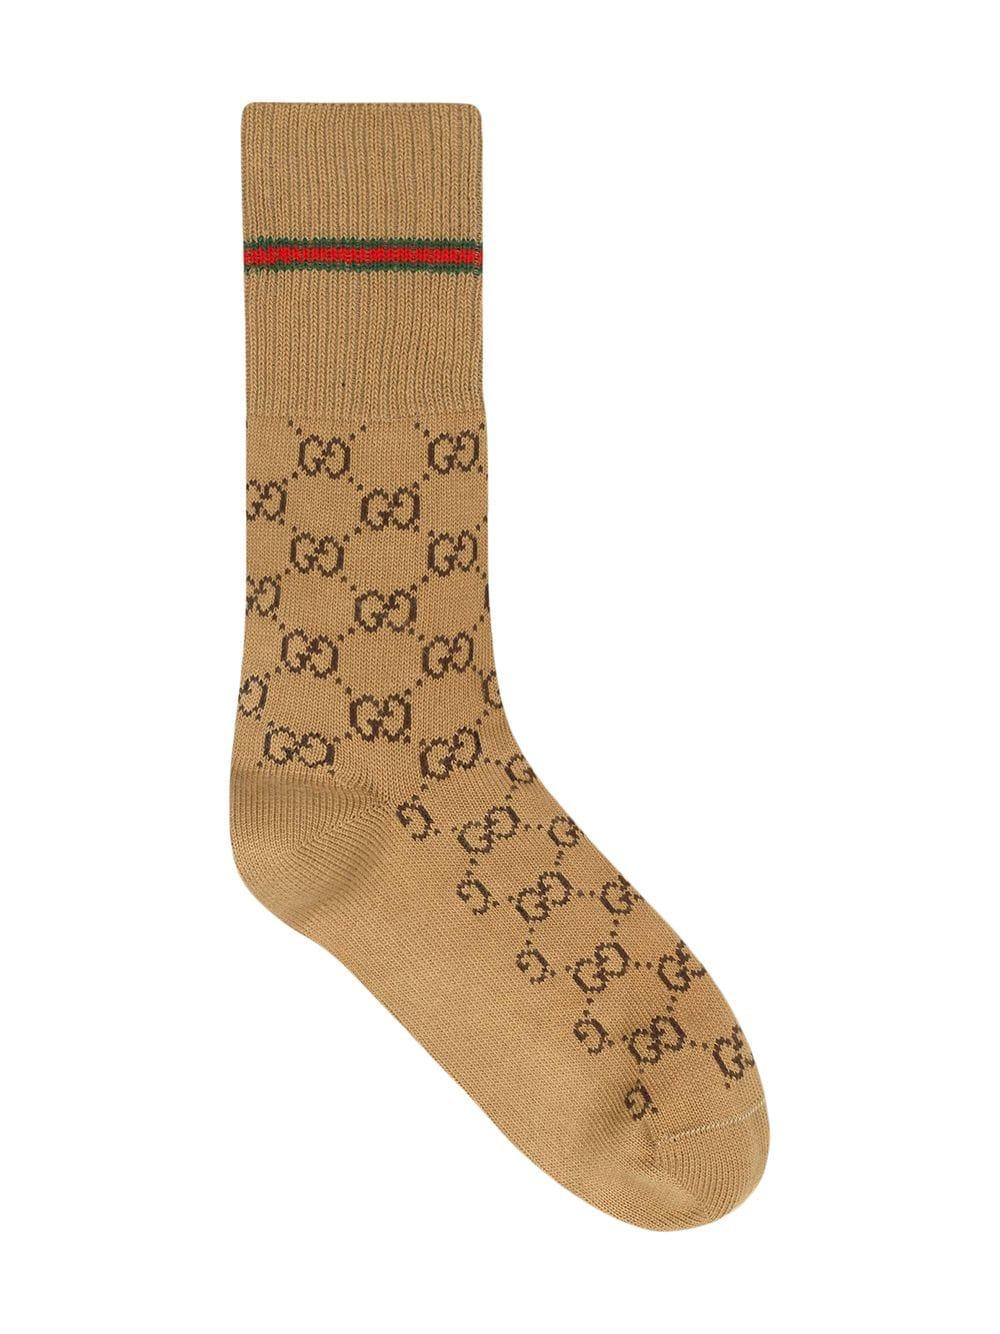 Gucci GG Cotton Socks With Web in Camel (Brown) for Men - Lyst